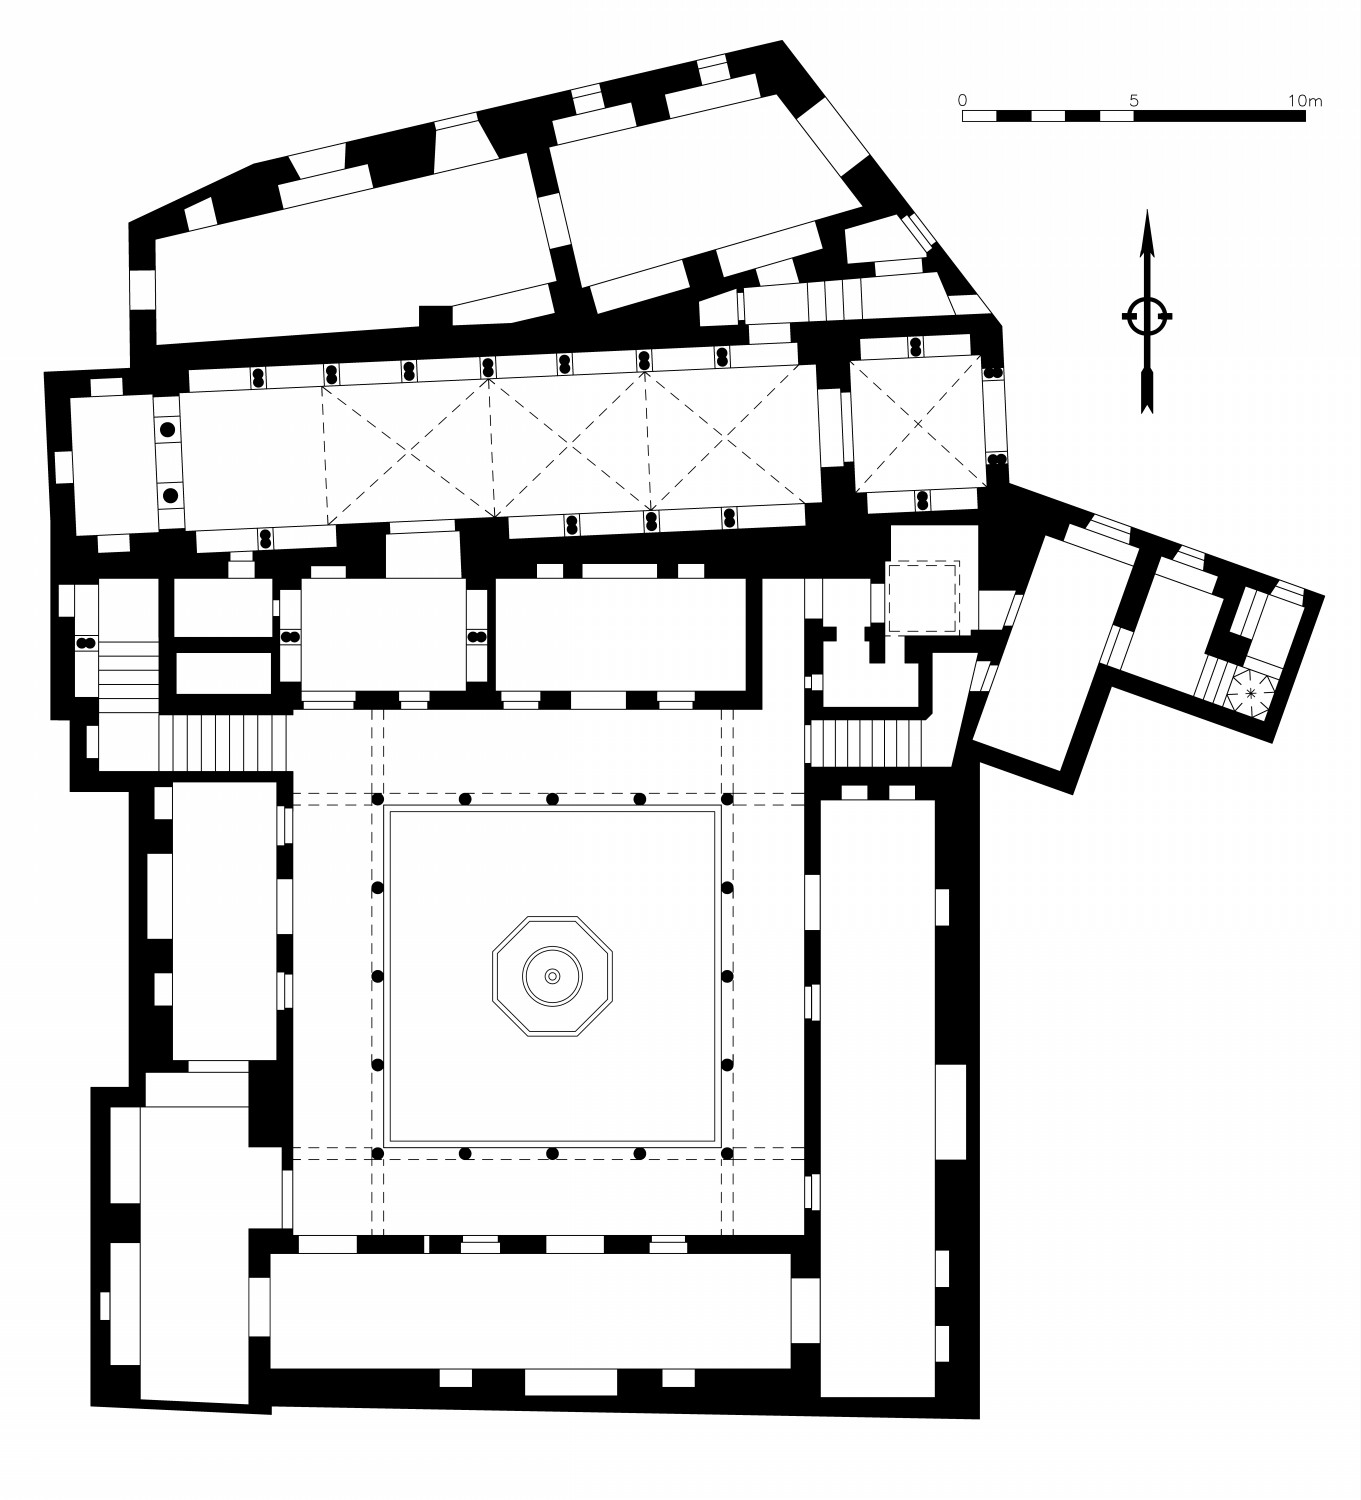 Plan of the first floor, Based on Golvin (1988)